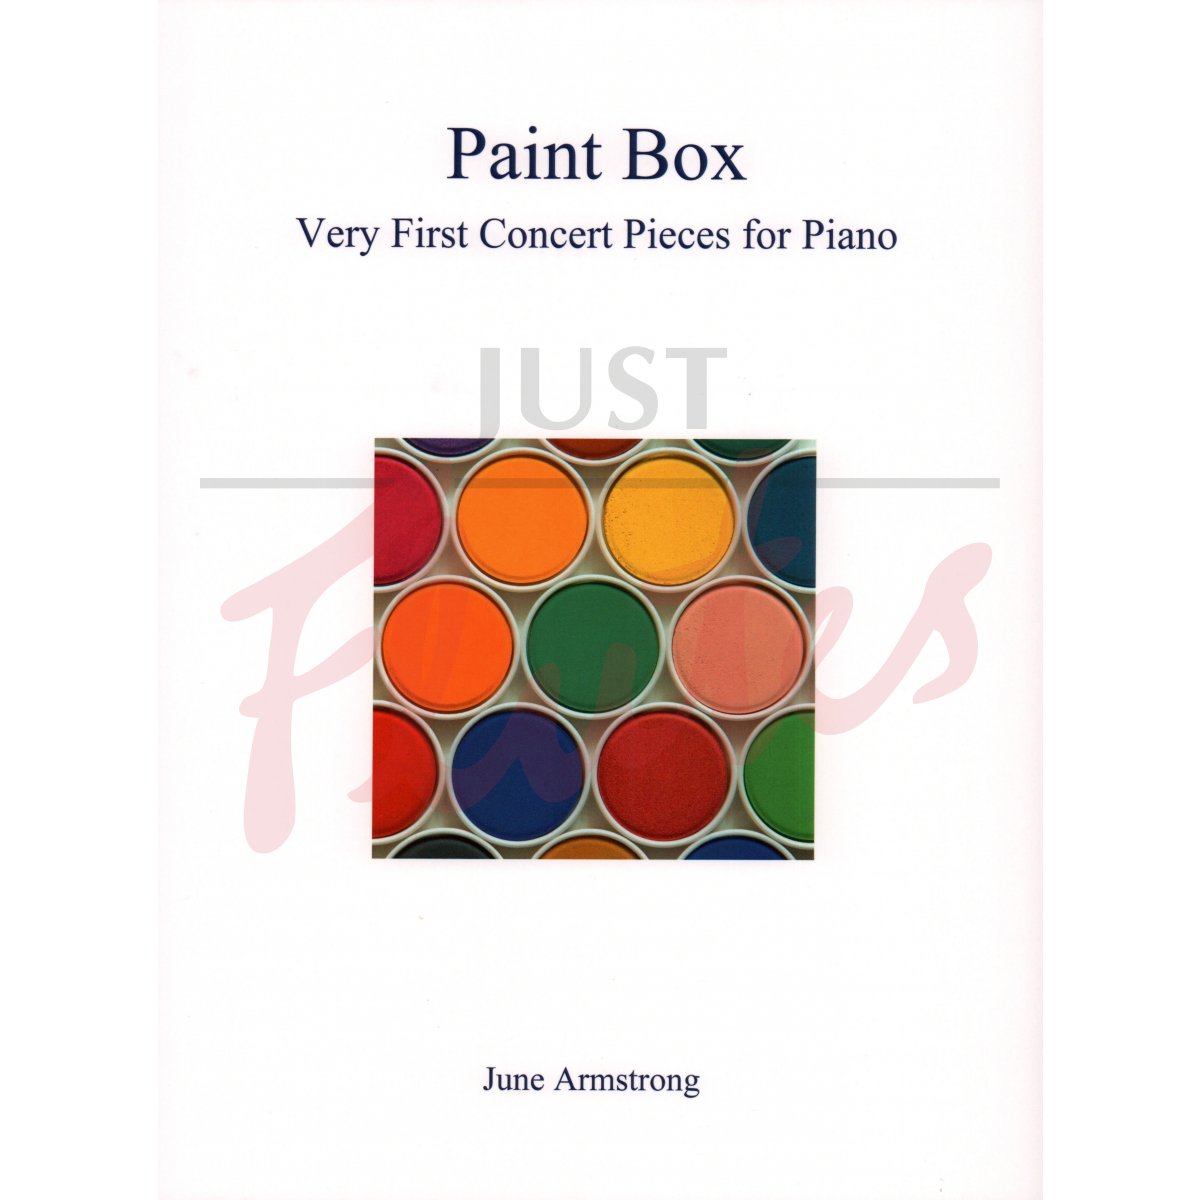 Paint Box: Very First Concert Pieces for Piano